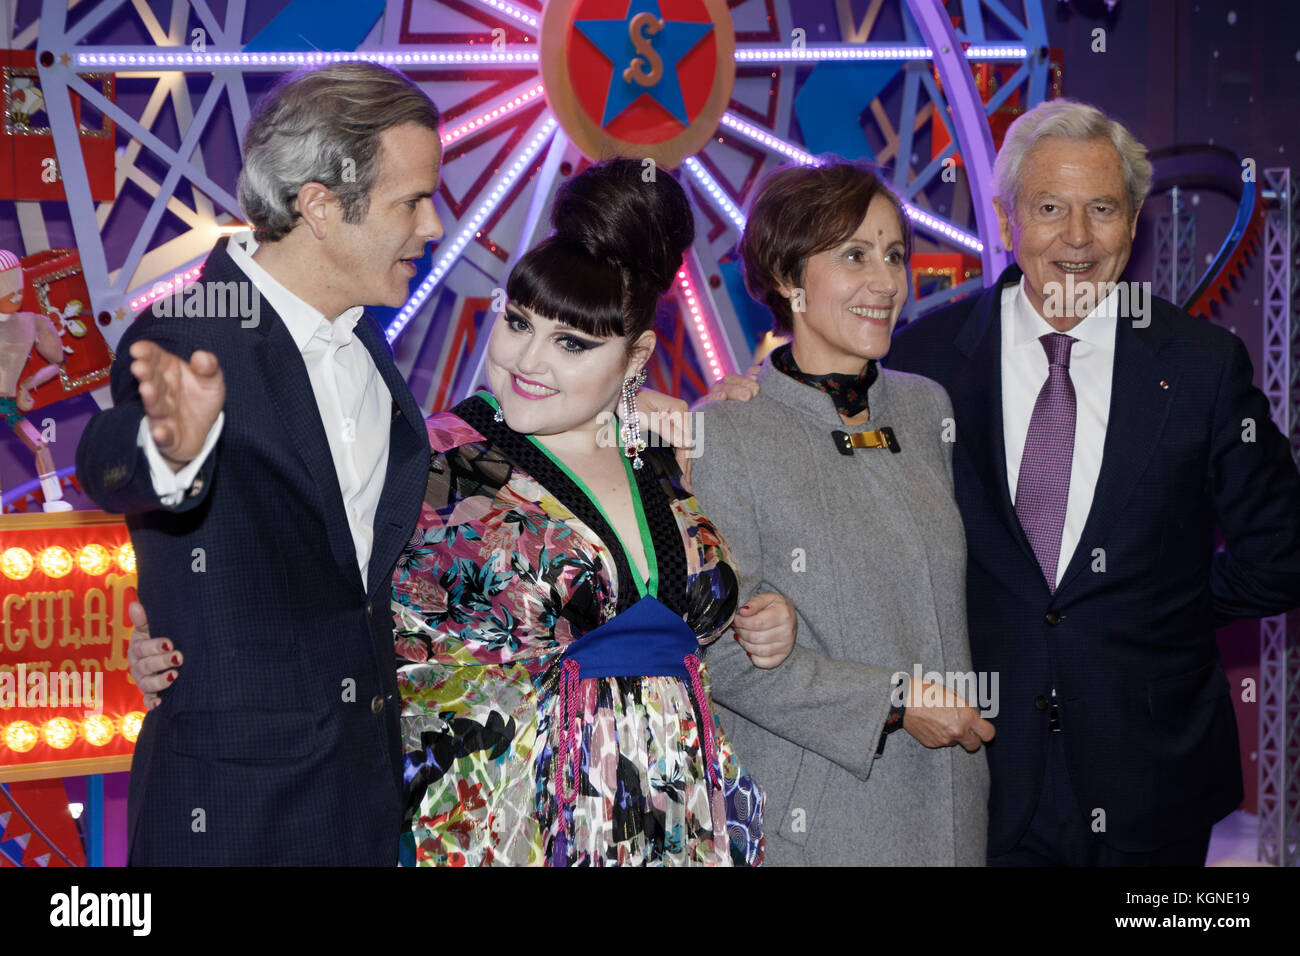 Paris, France. 8th Nov, 2017. Guillaume Houzé, Beth Ditto, Agnès Vigneron and Philippe Houzé attend early Christmas festivities at Galeries Lafayette on November 8, 2017 in Paris, France. Credit: Bernard Menigault/Alamy Live News Stock Photo